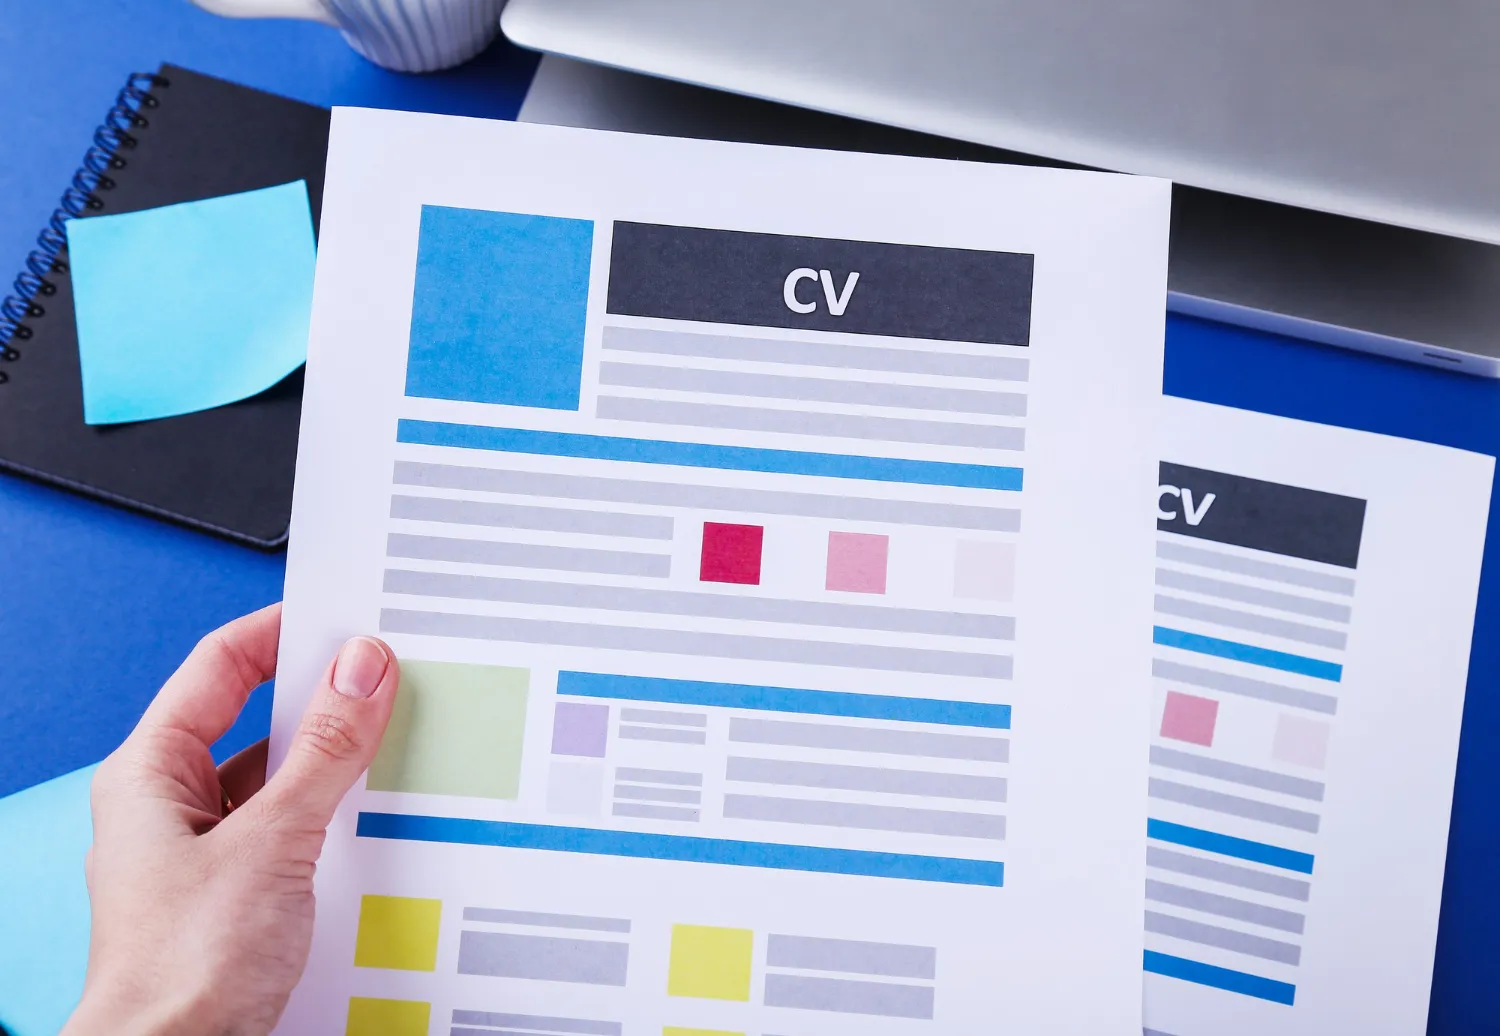 Close-up of a hand holding a colorful, well-organized CV. Learn valuable resume crafting tips with JOH Partners to impress potential employers.